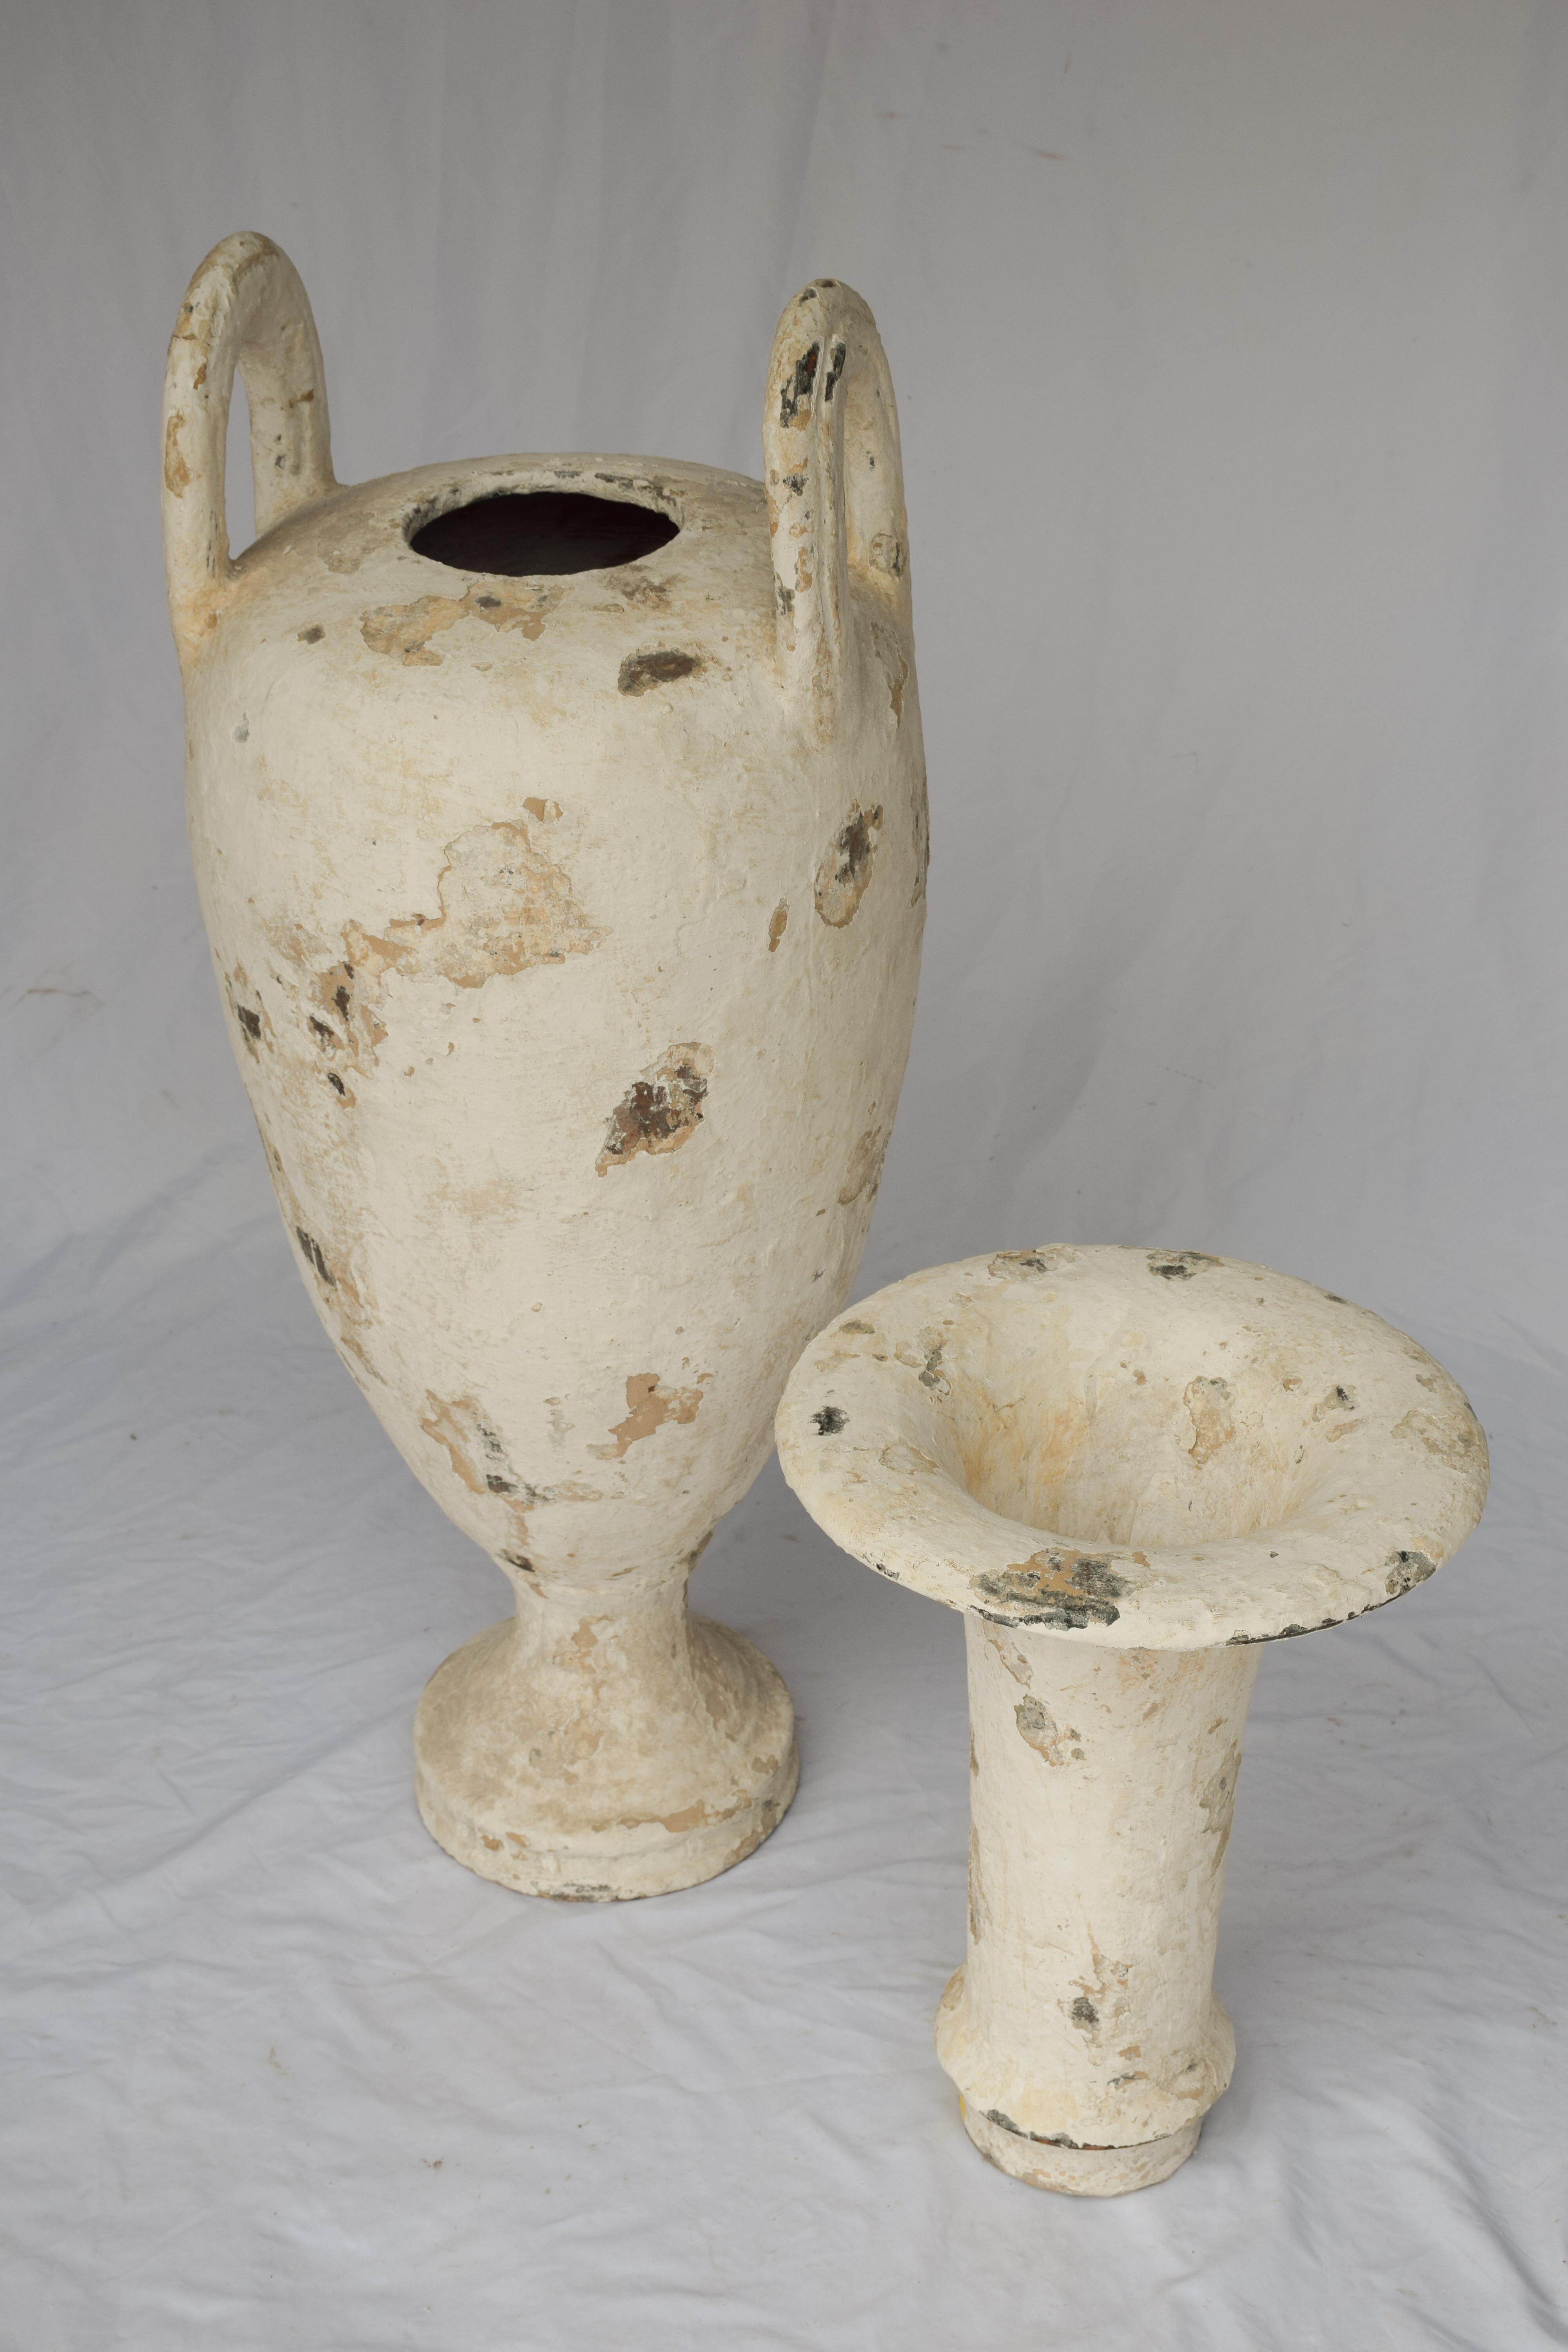 Often referred to as an olive oil jar, but are actually an amphora, which is a type of container of a specific shape and dimension, beginning in the Neolithic Period, which ran from approximately 9000BC to 3500BC. Generally, Amphora jars were used